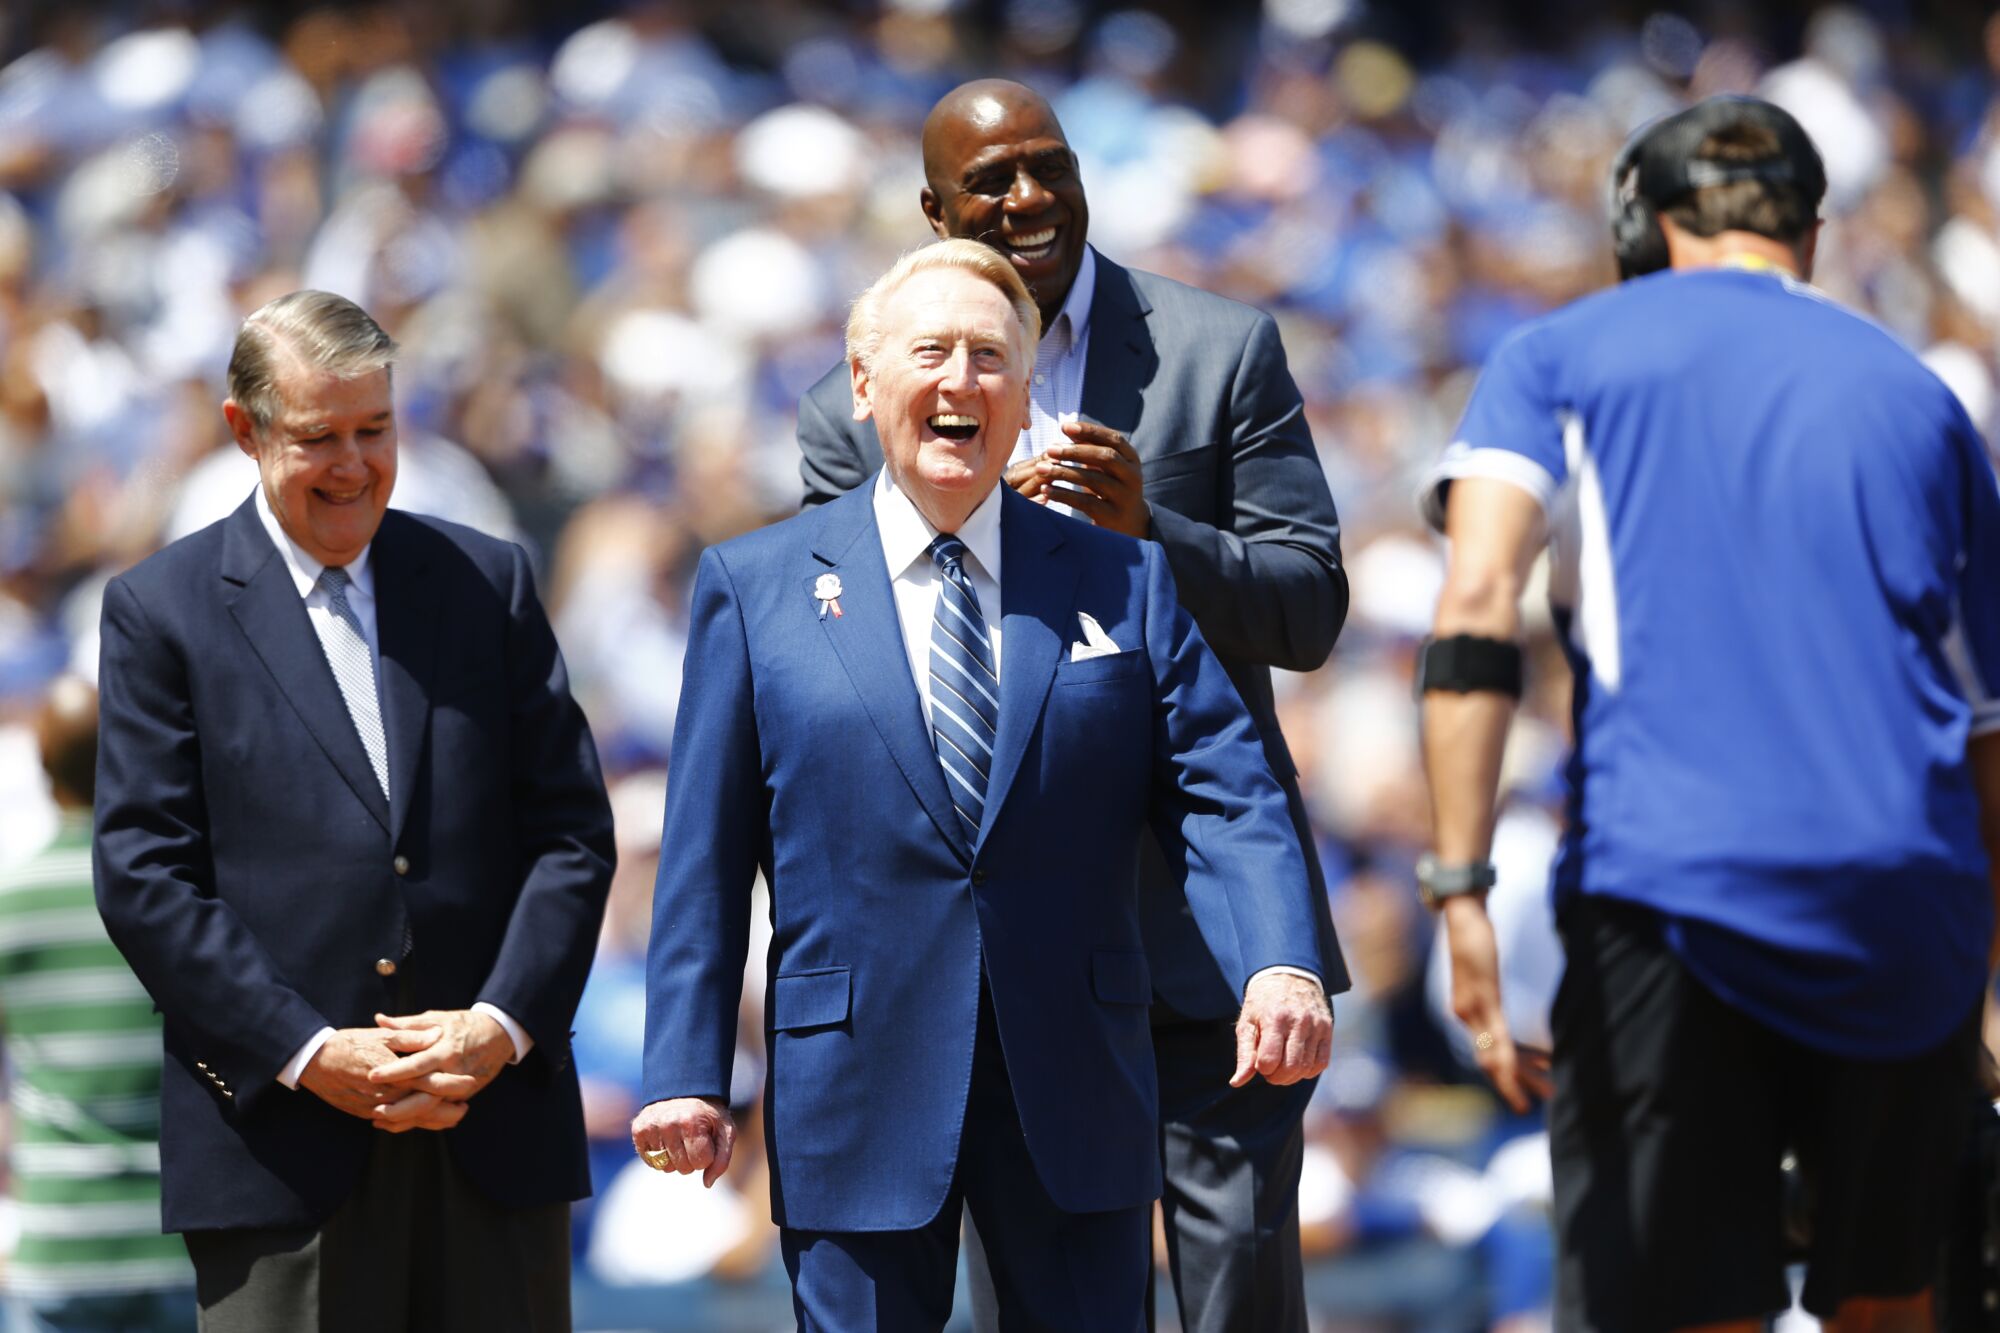 Dodgers broadcaster Vin Scully is honored before the home opener in 2016.